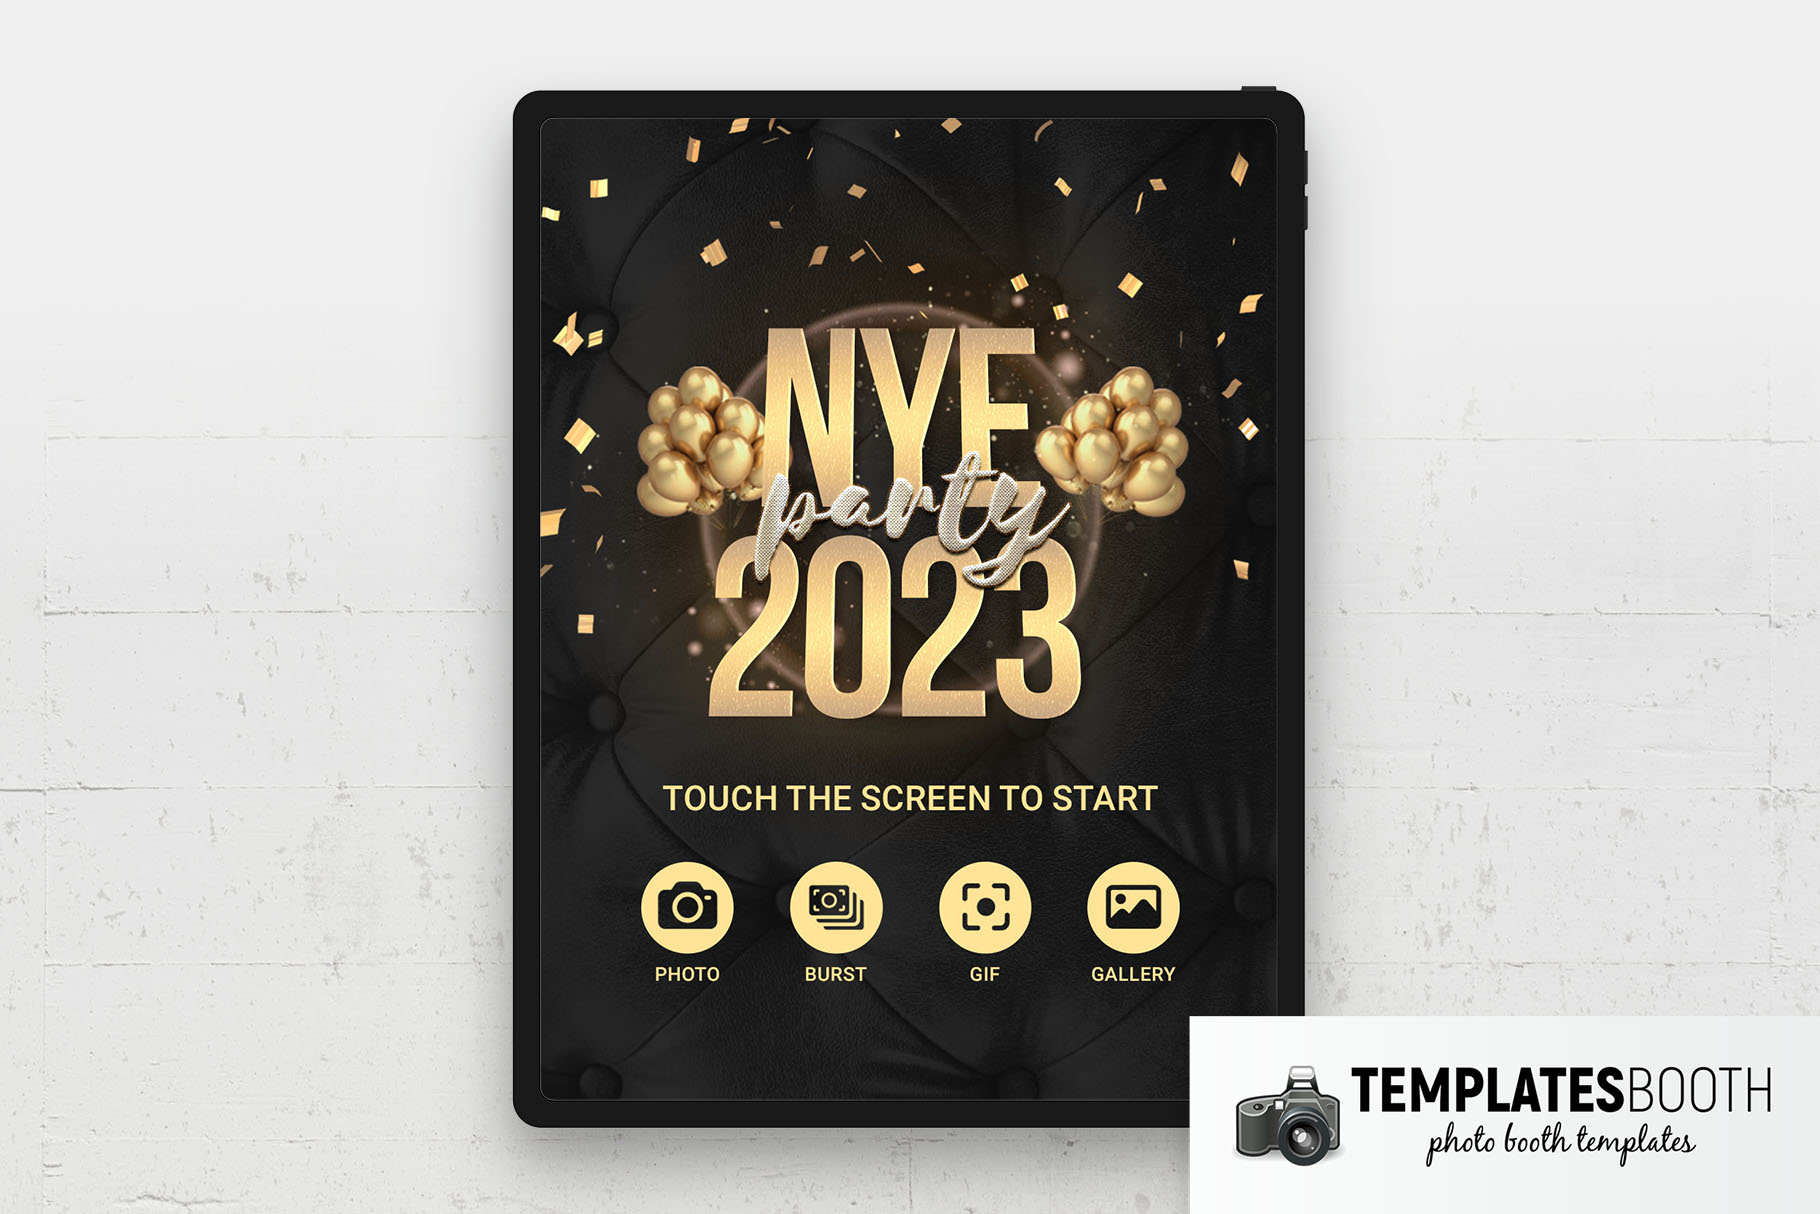 New Year's Eve Photo Booth Welcome Screen